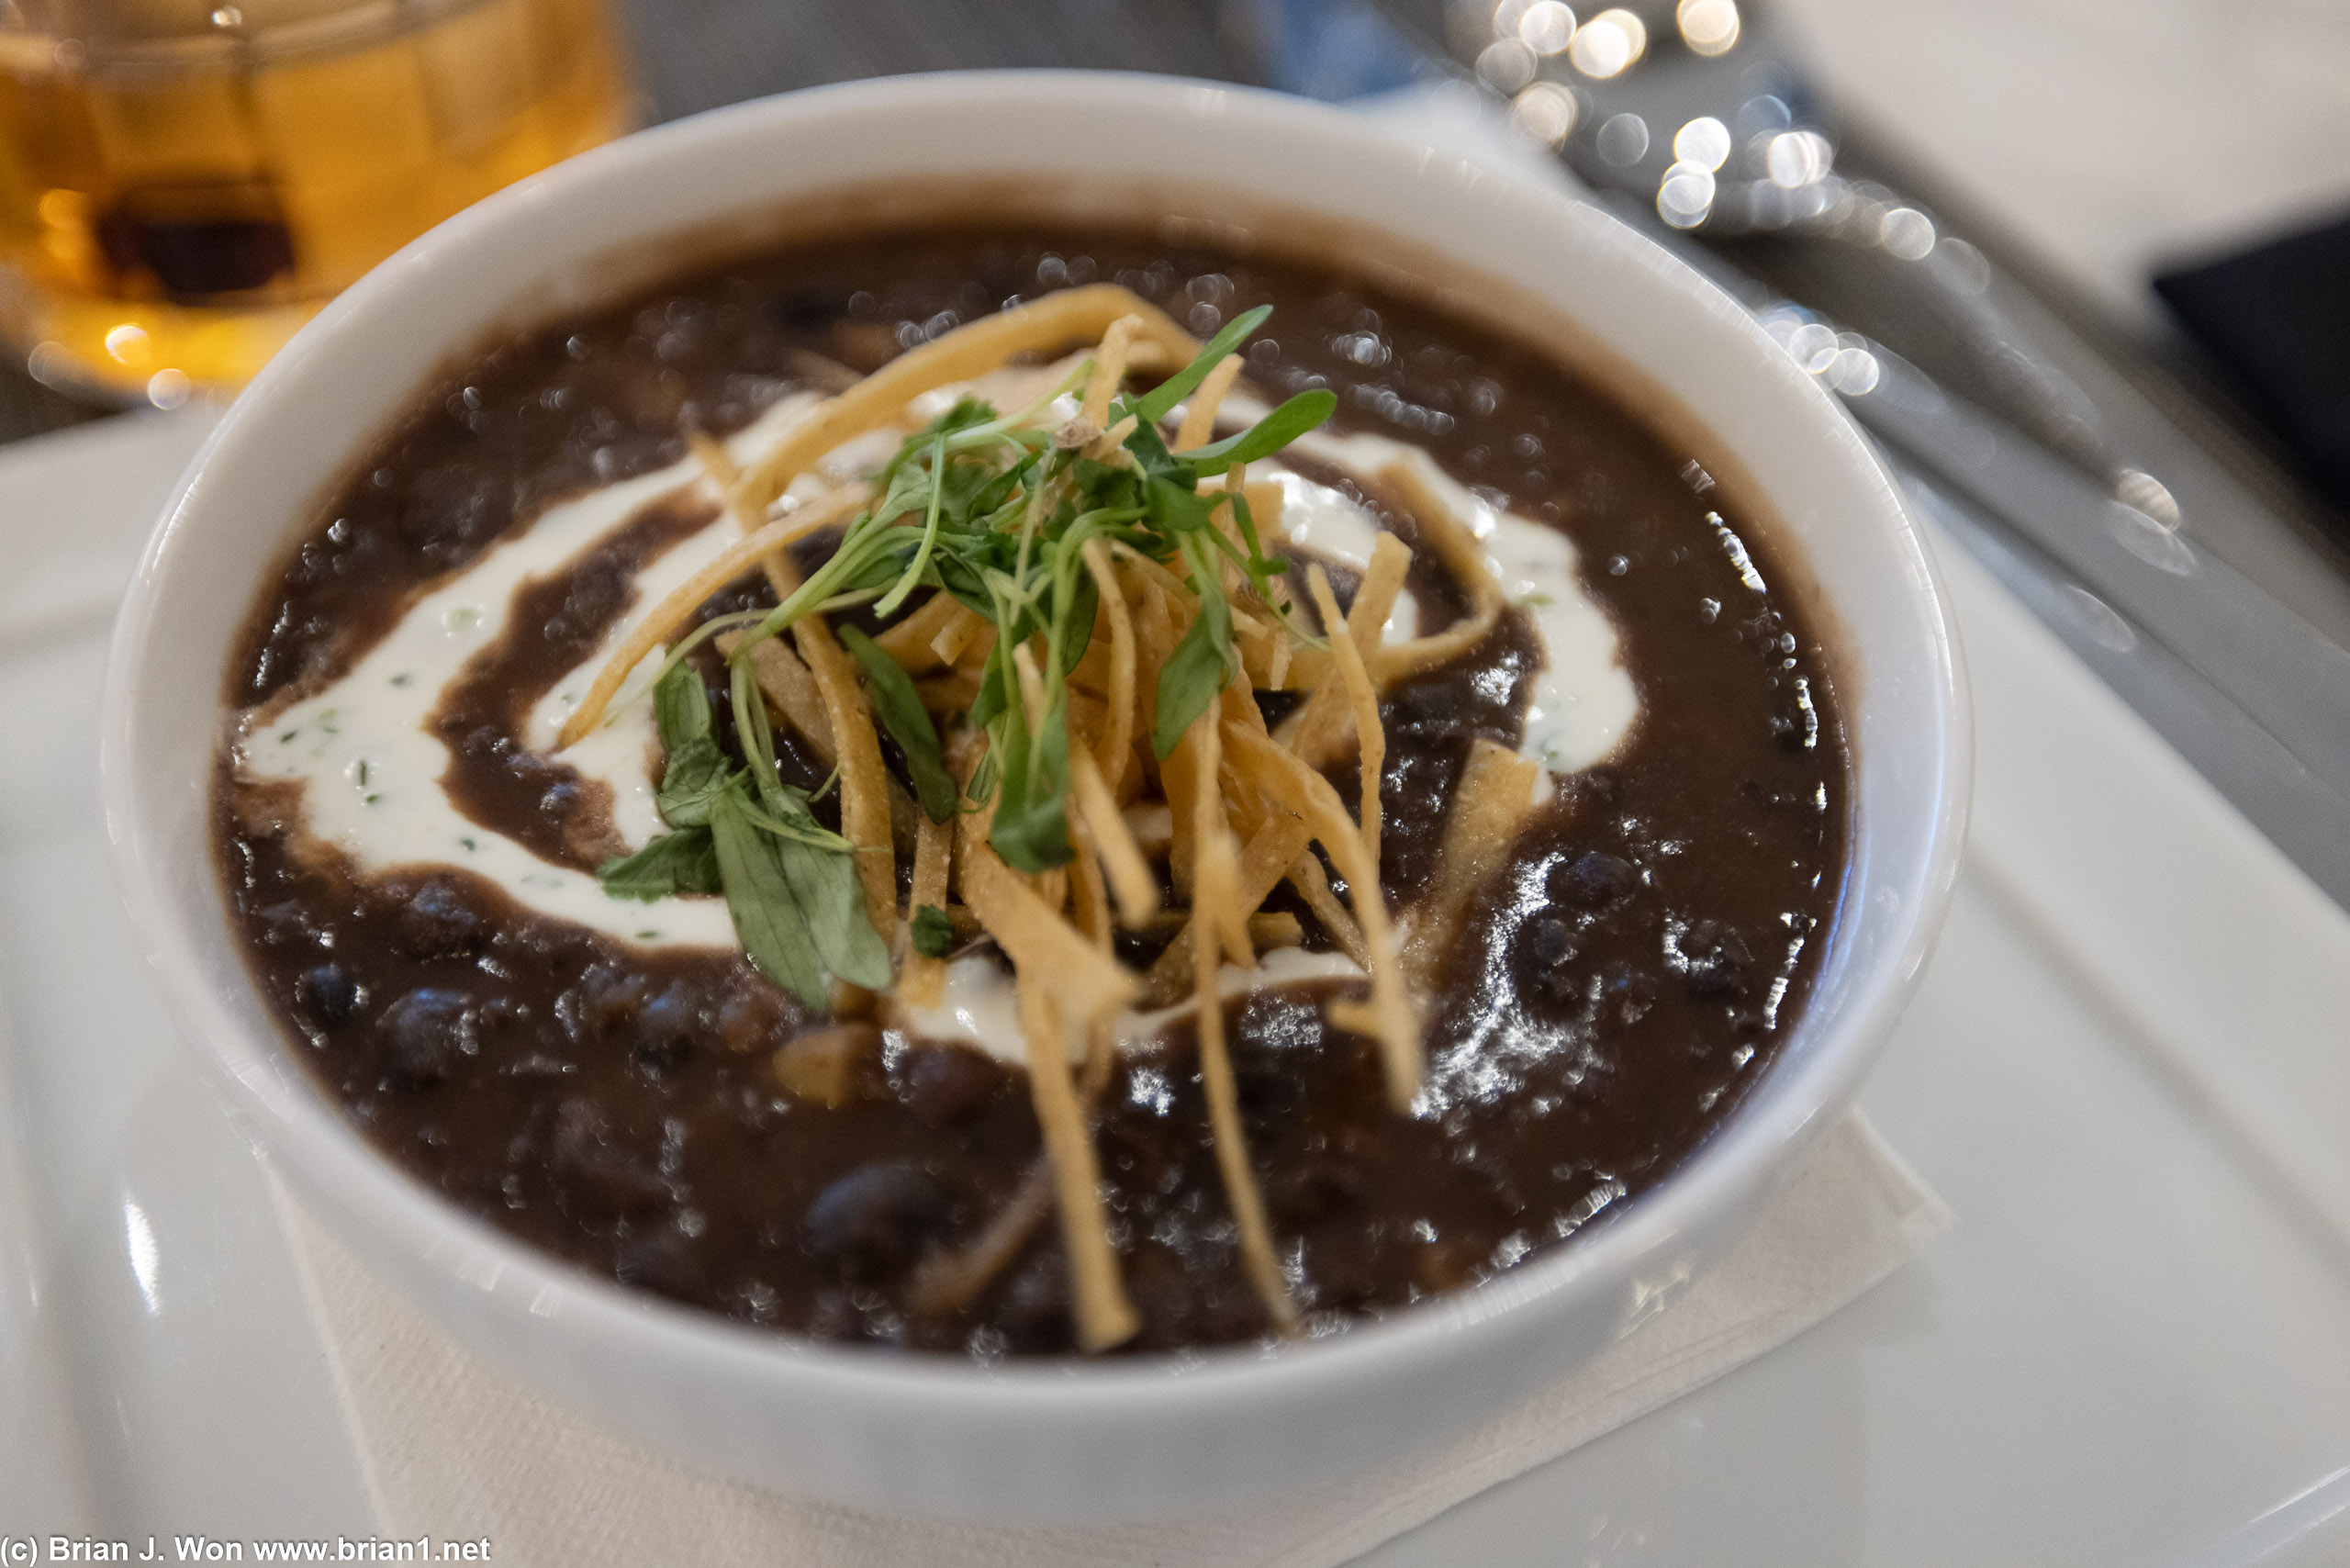 Black bean corn soup was also elegant presented (for an airline club).